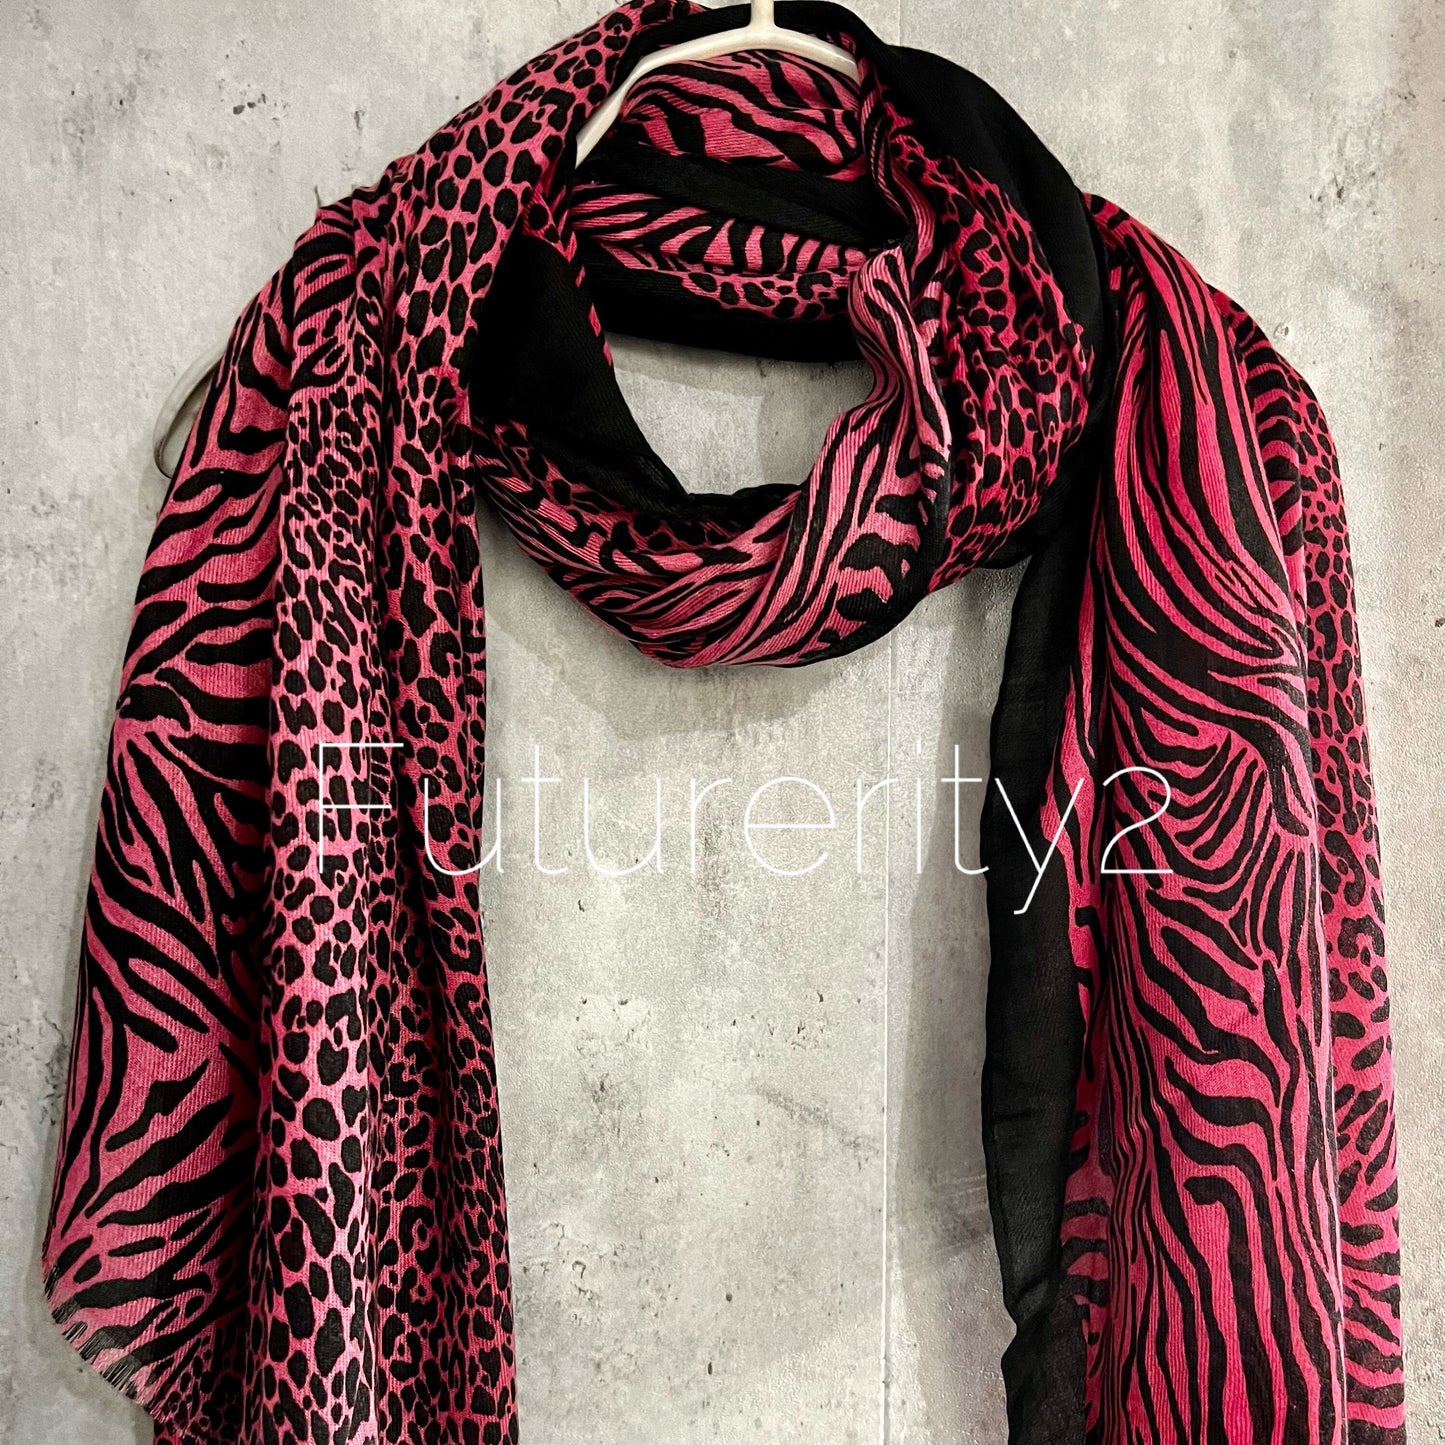 Micro Leopard X Zebra Pattern Pattern Pink Cotton Scarf/Summer Autumn Winter Scarf/Women Scarf/Gifts For Her Birthday Christmas/UK Seller